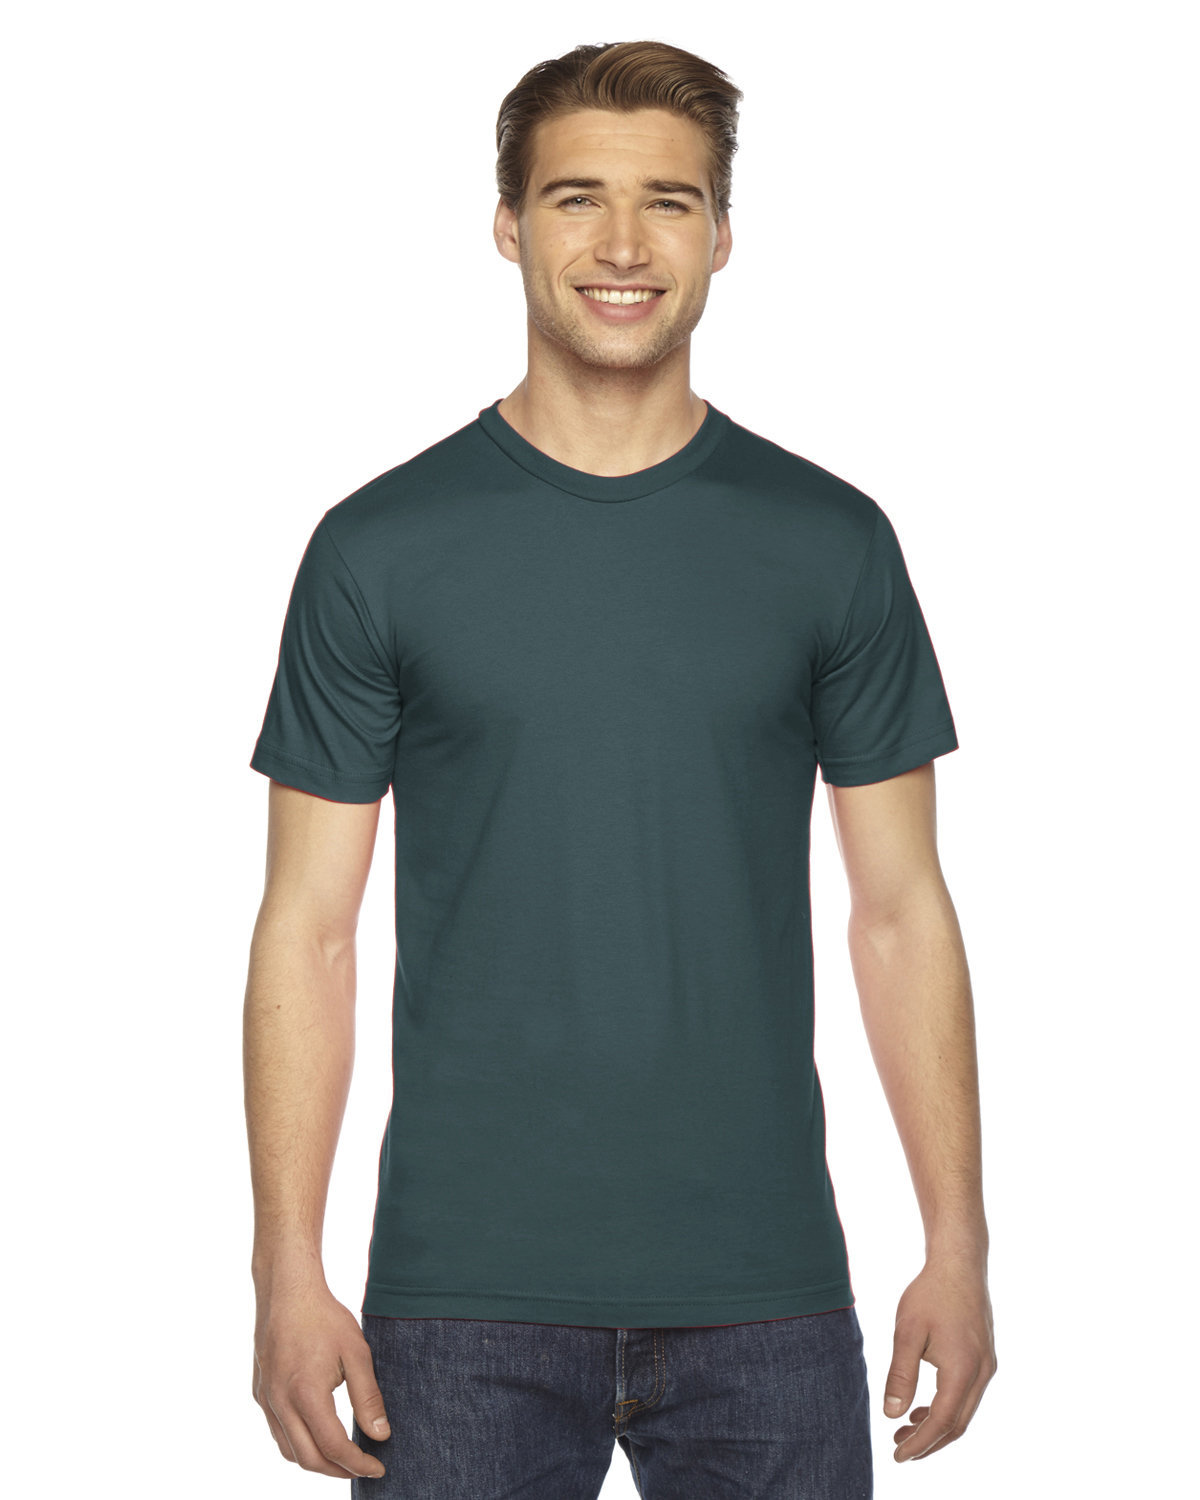 American Apparel Unisex Fine Jersey USA Made T-Shirt forest 